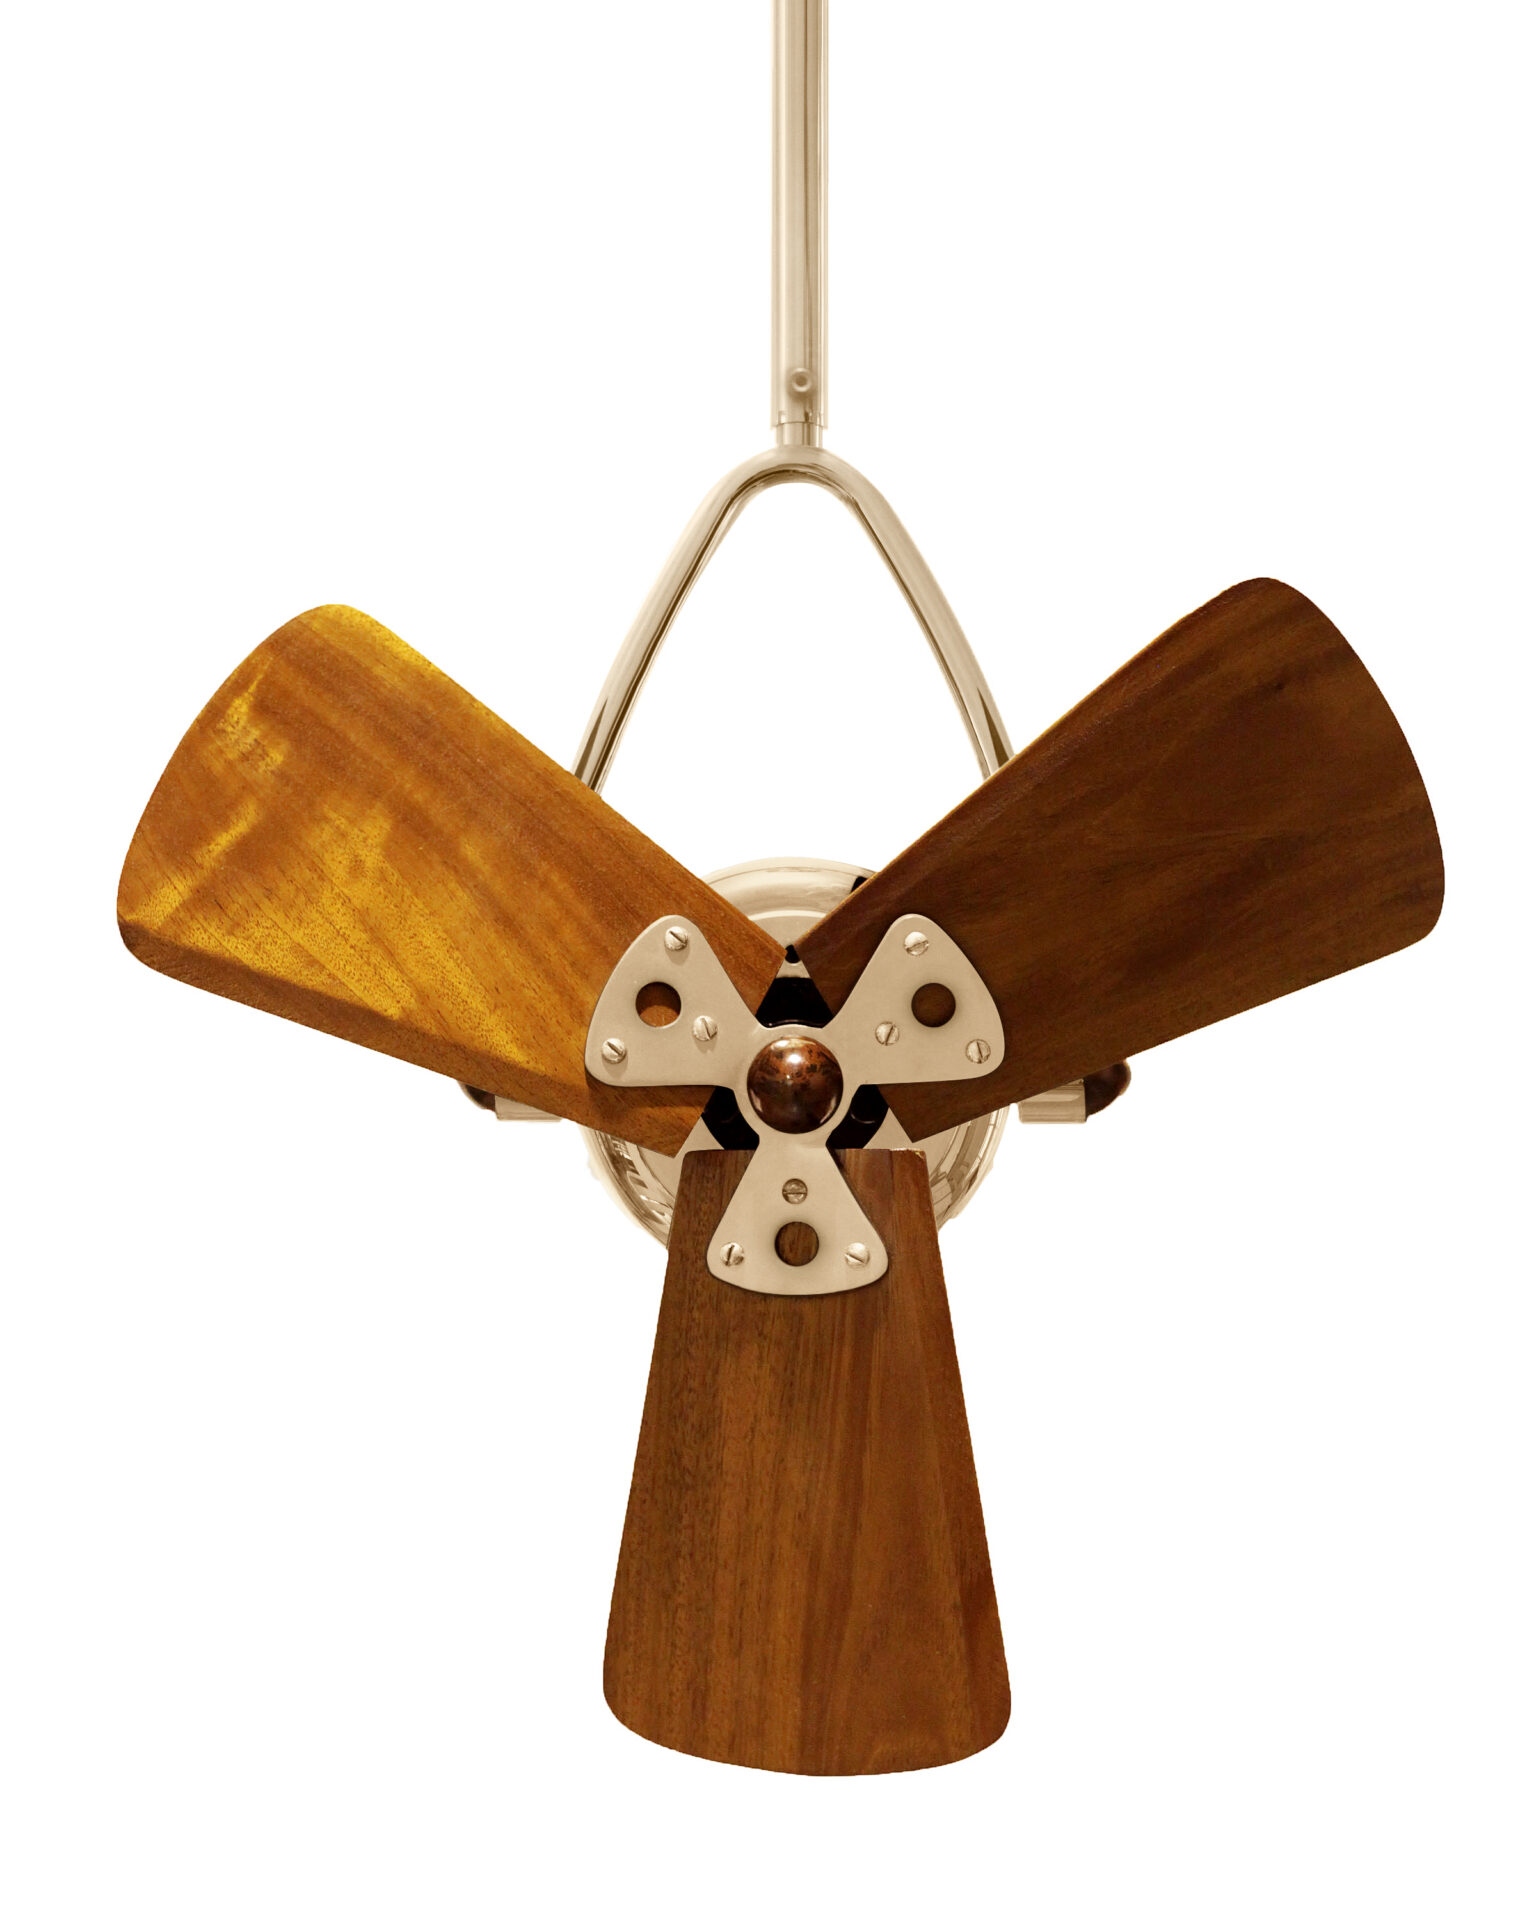 Jarold Direcional ceiling fan in Polished Brass finish with Solid Mahogany Blades made by Matthews Fan Company.